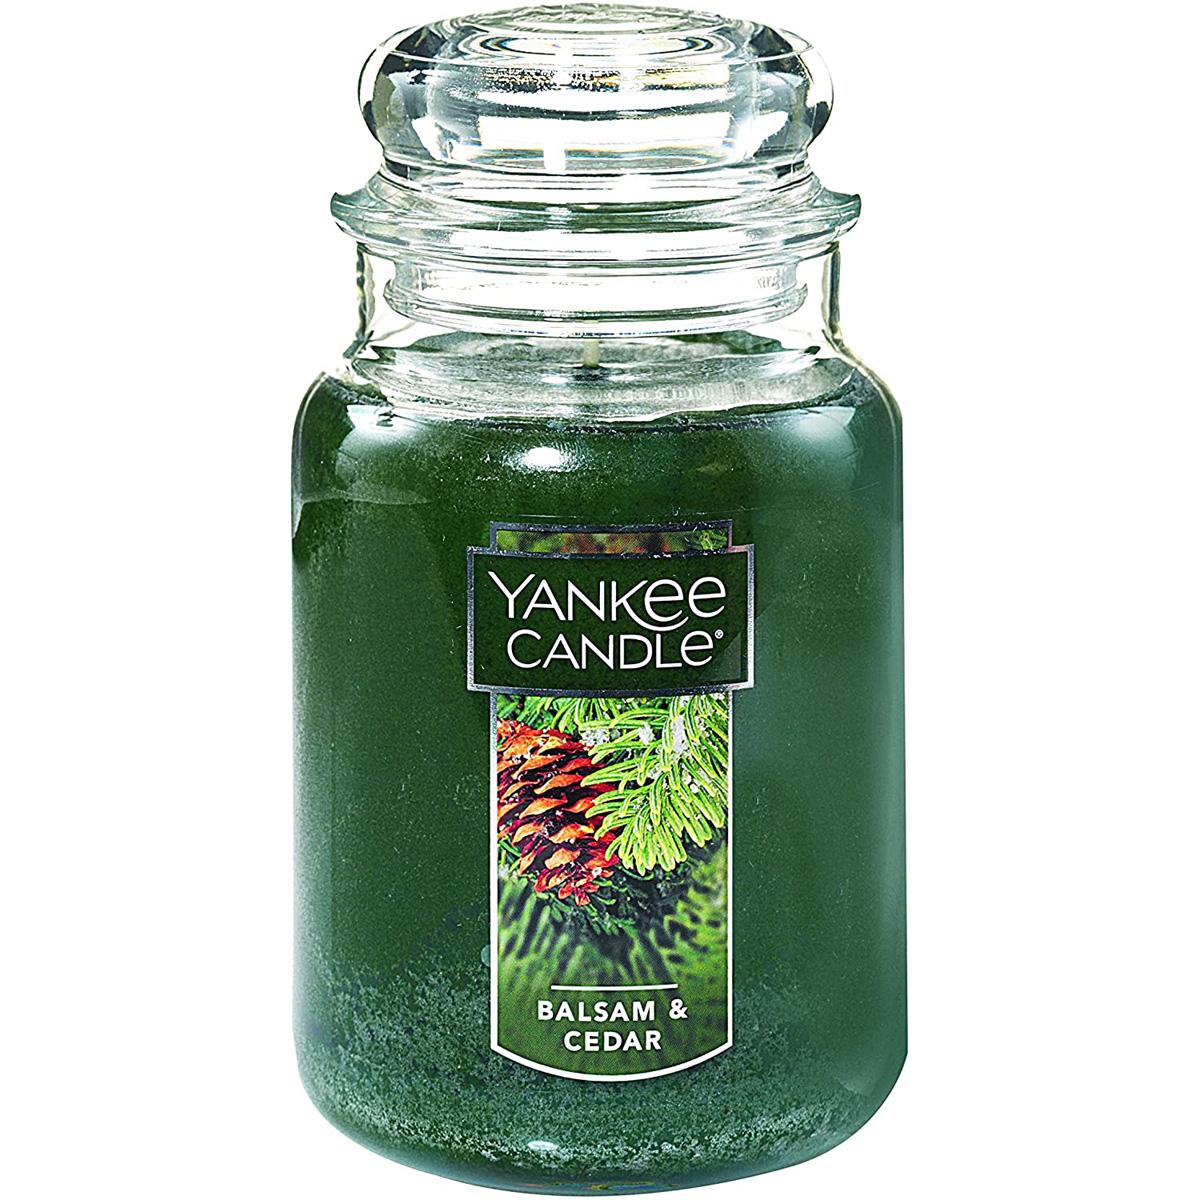 Yankee Candle Balsam and Cedar Large Jar Candle for $12